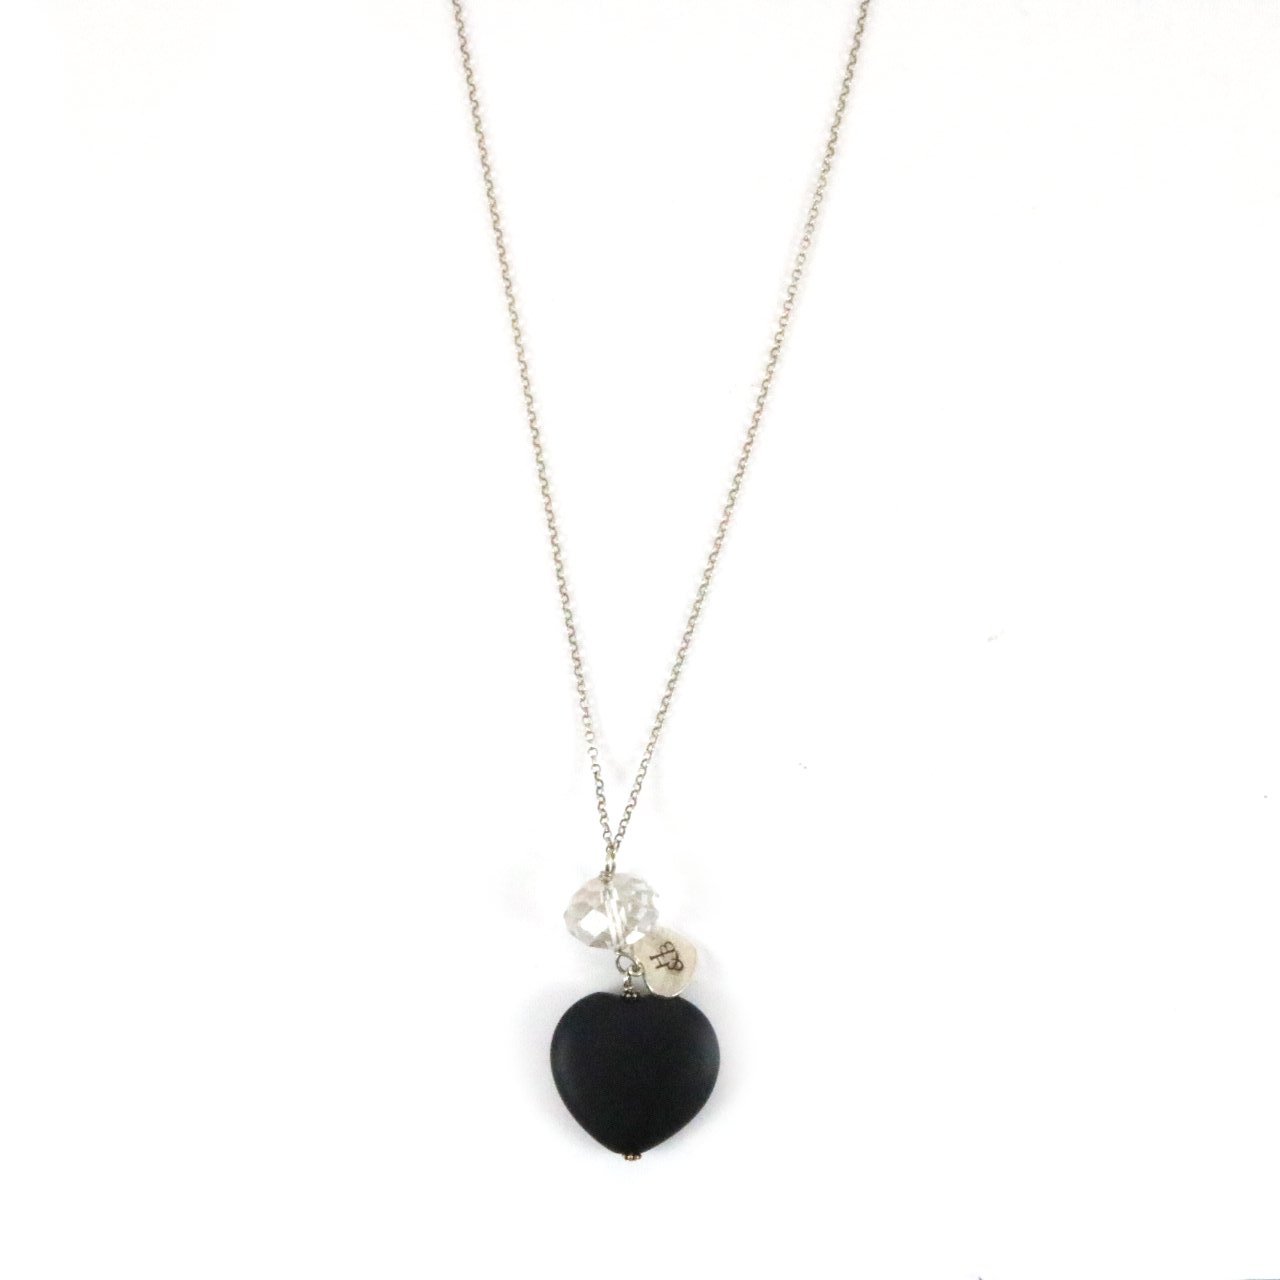 Wooden Black Heart with Crystal Silver Necklace